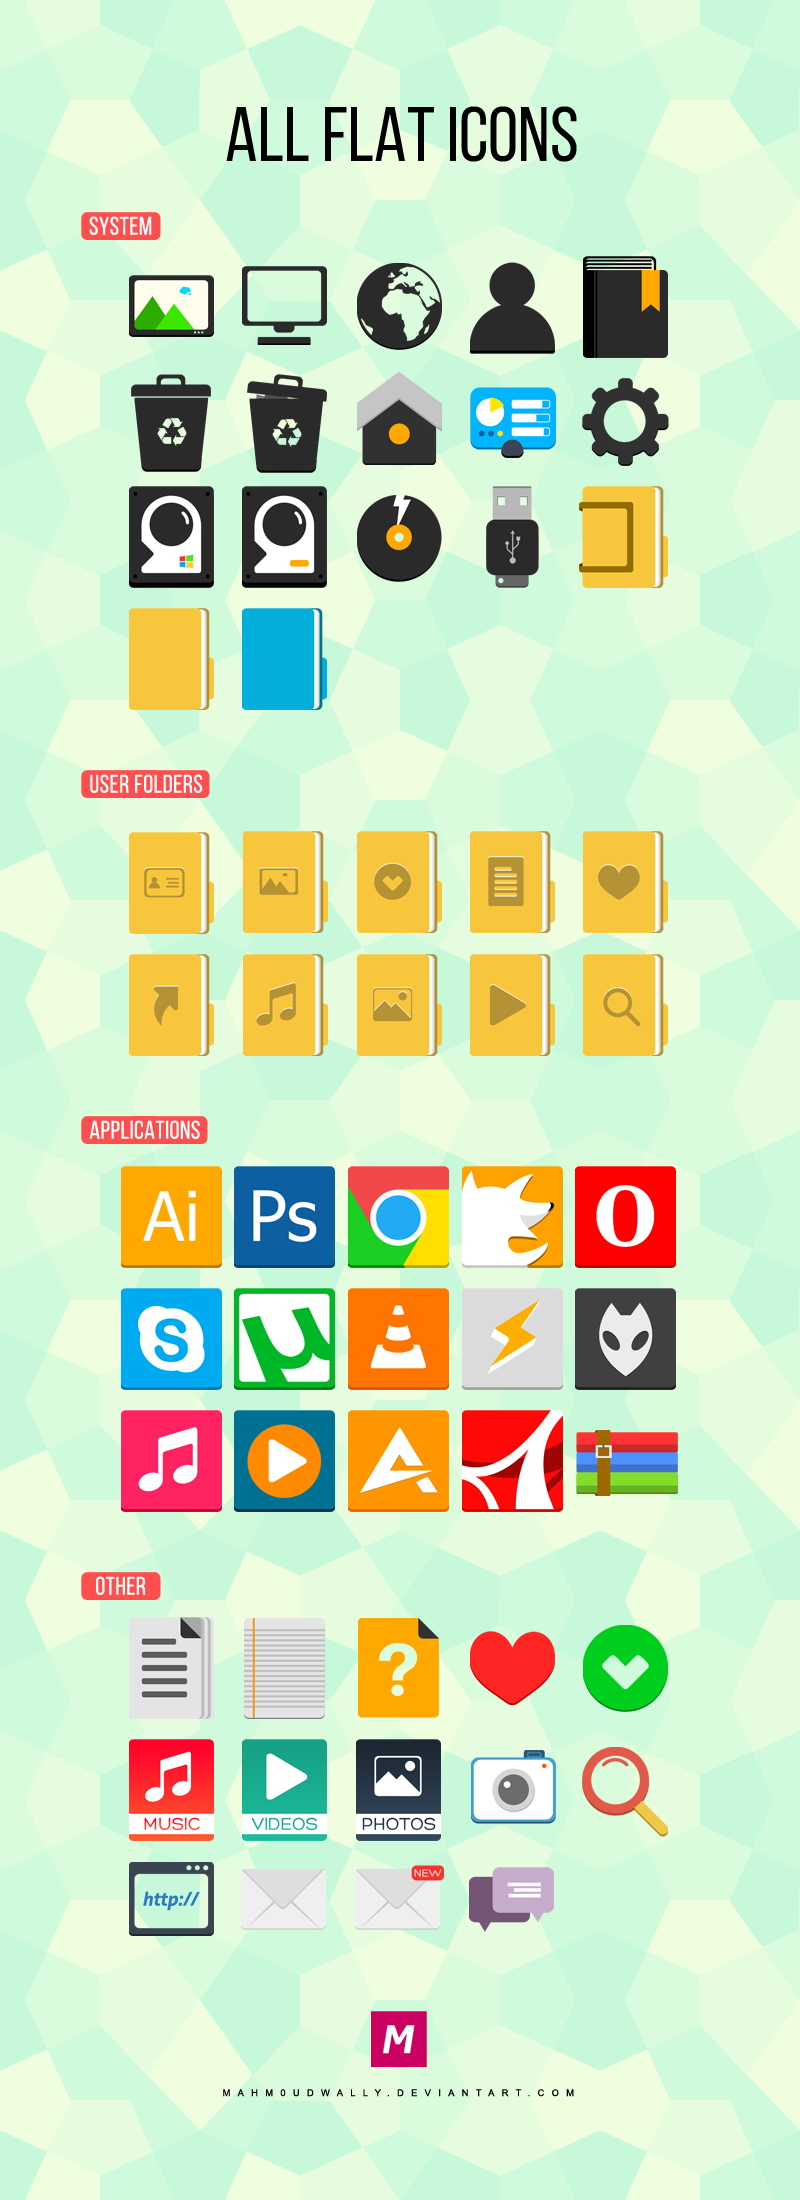 All Flat Icons